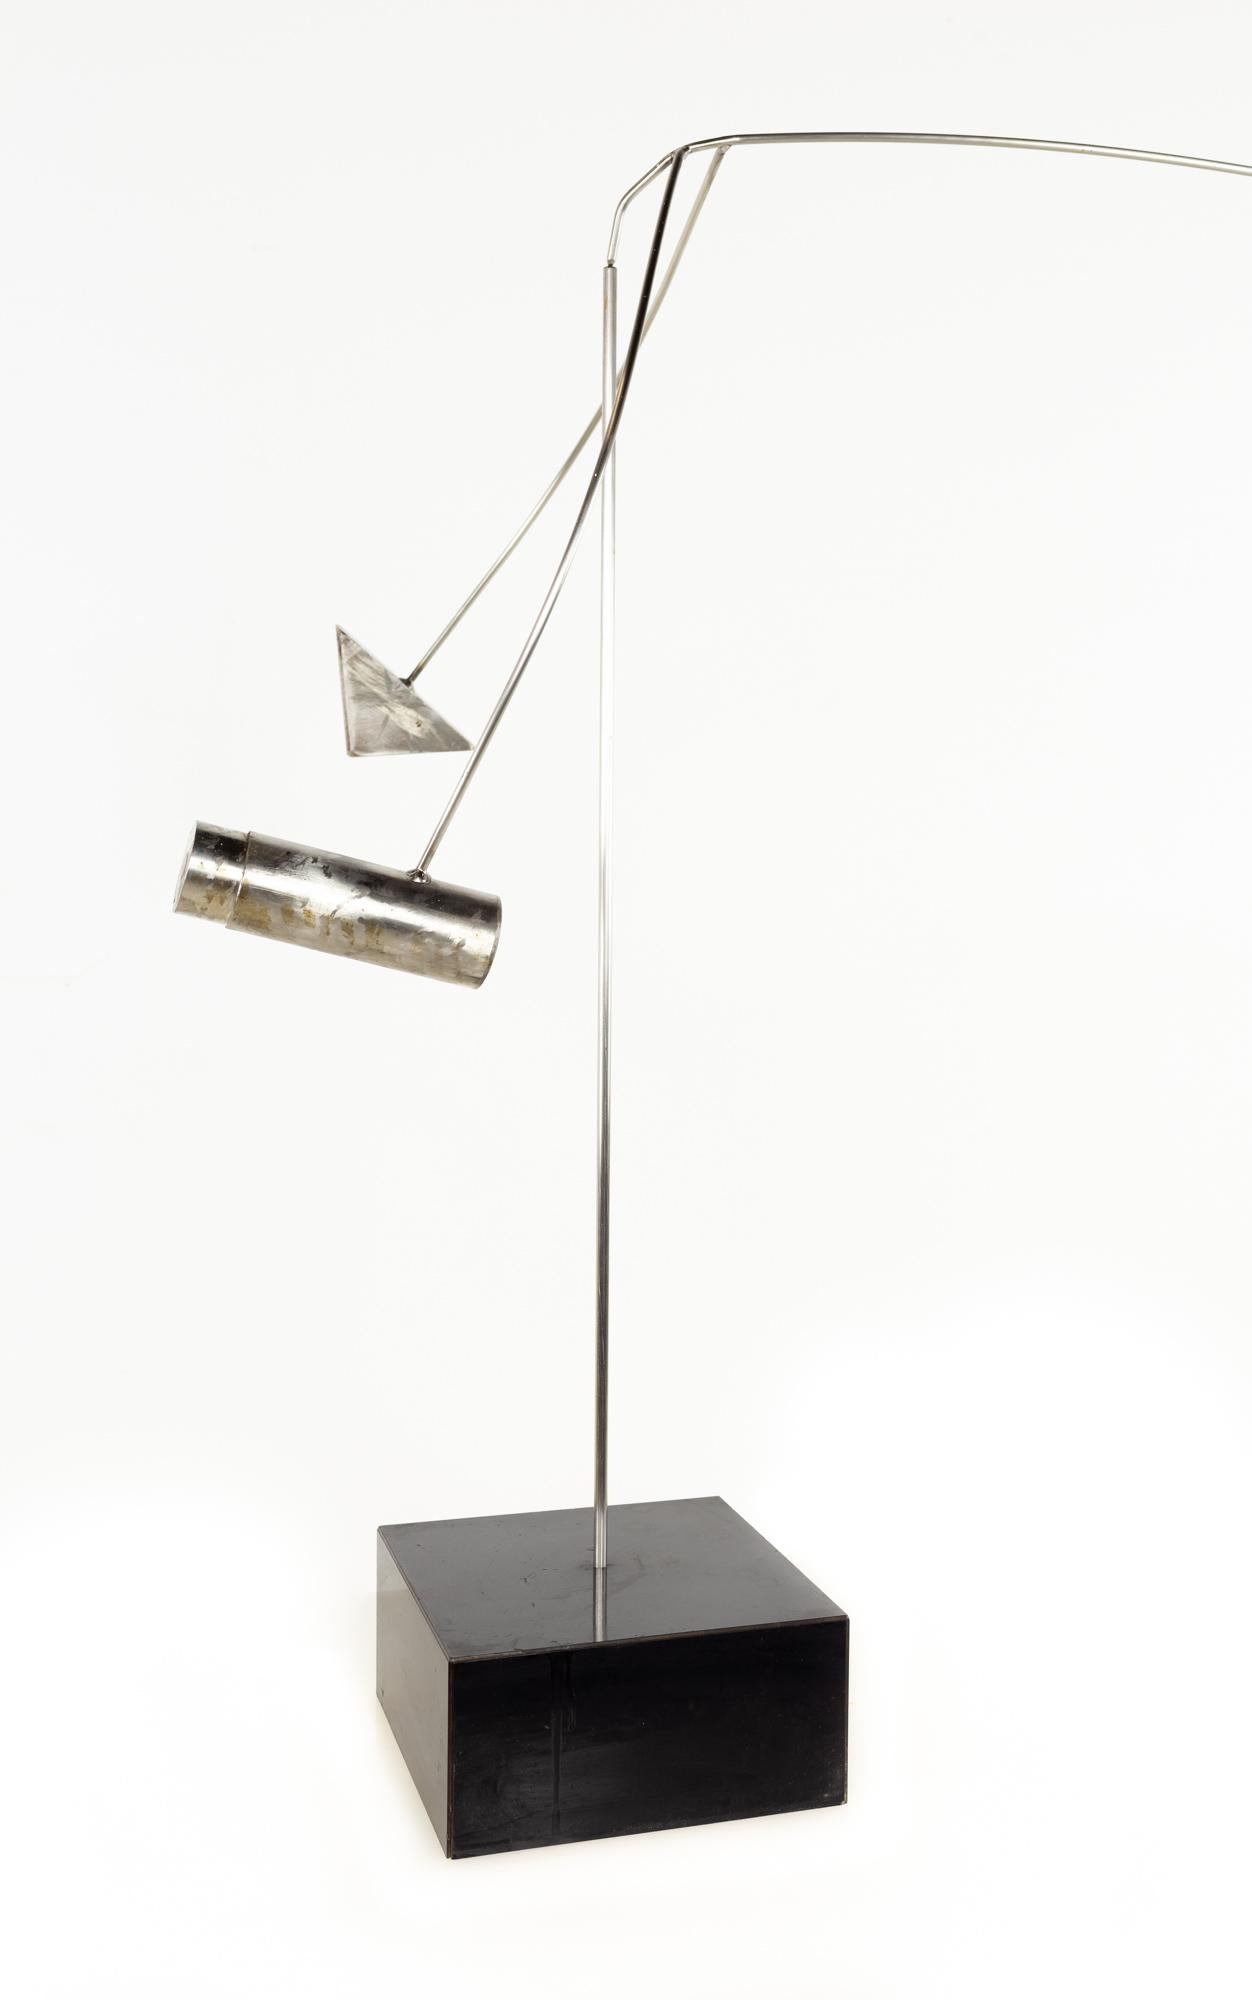 kinetic and mobiles sculpture